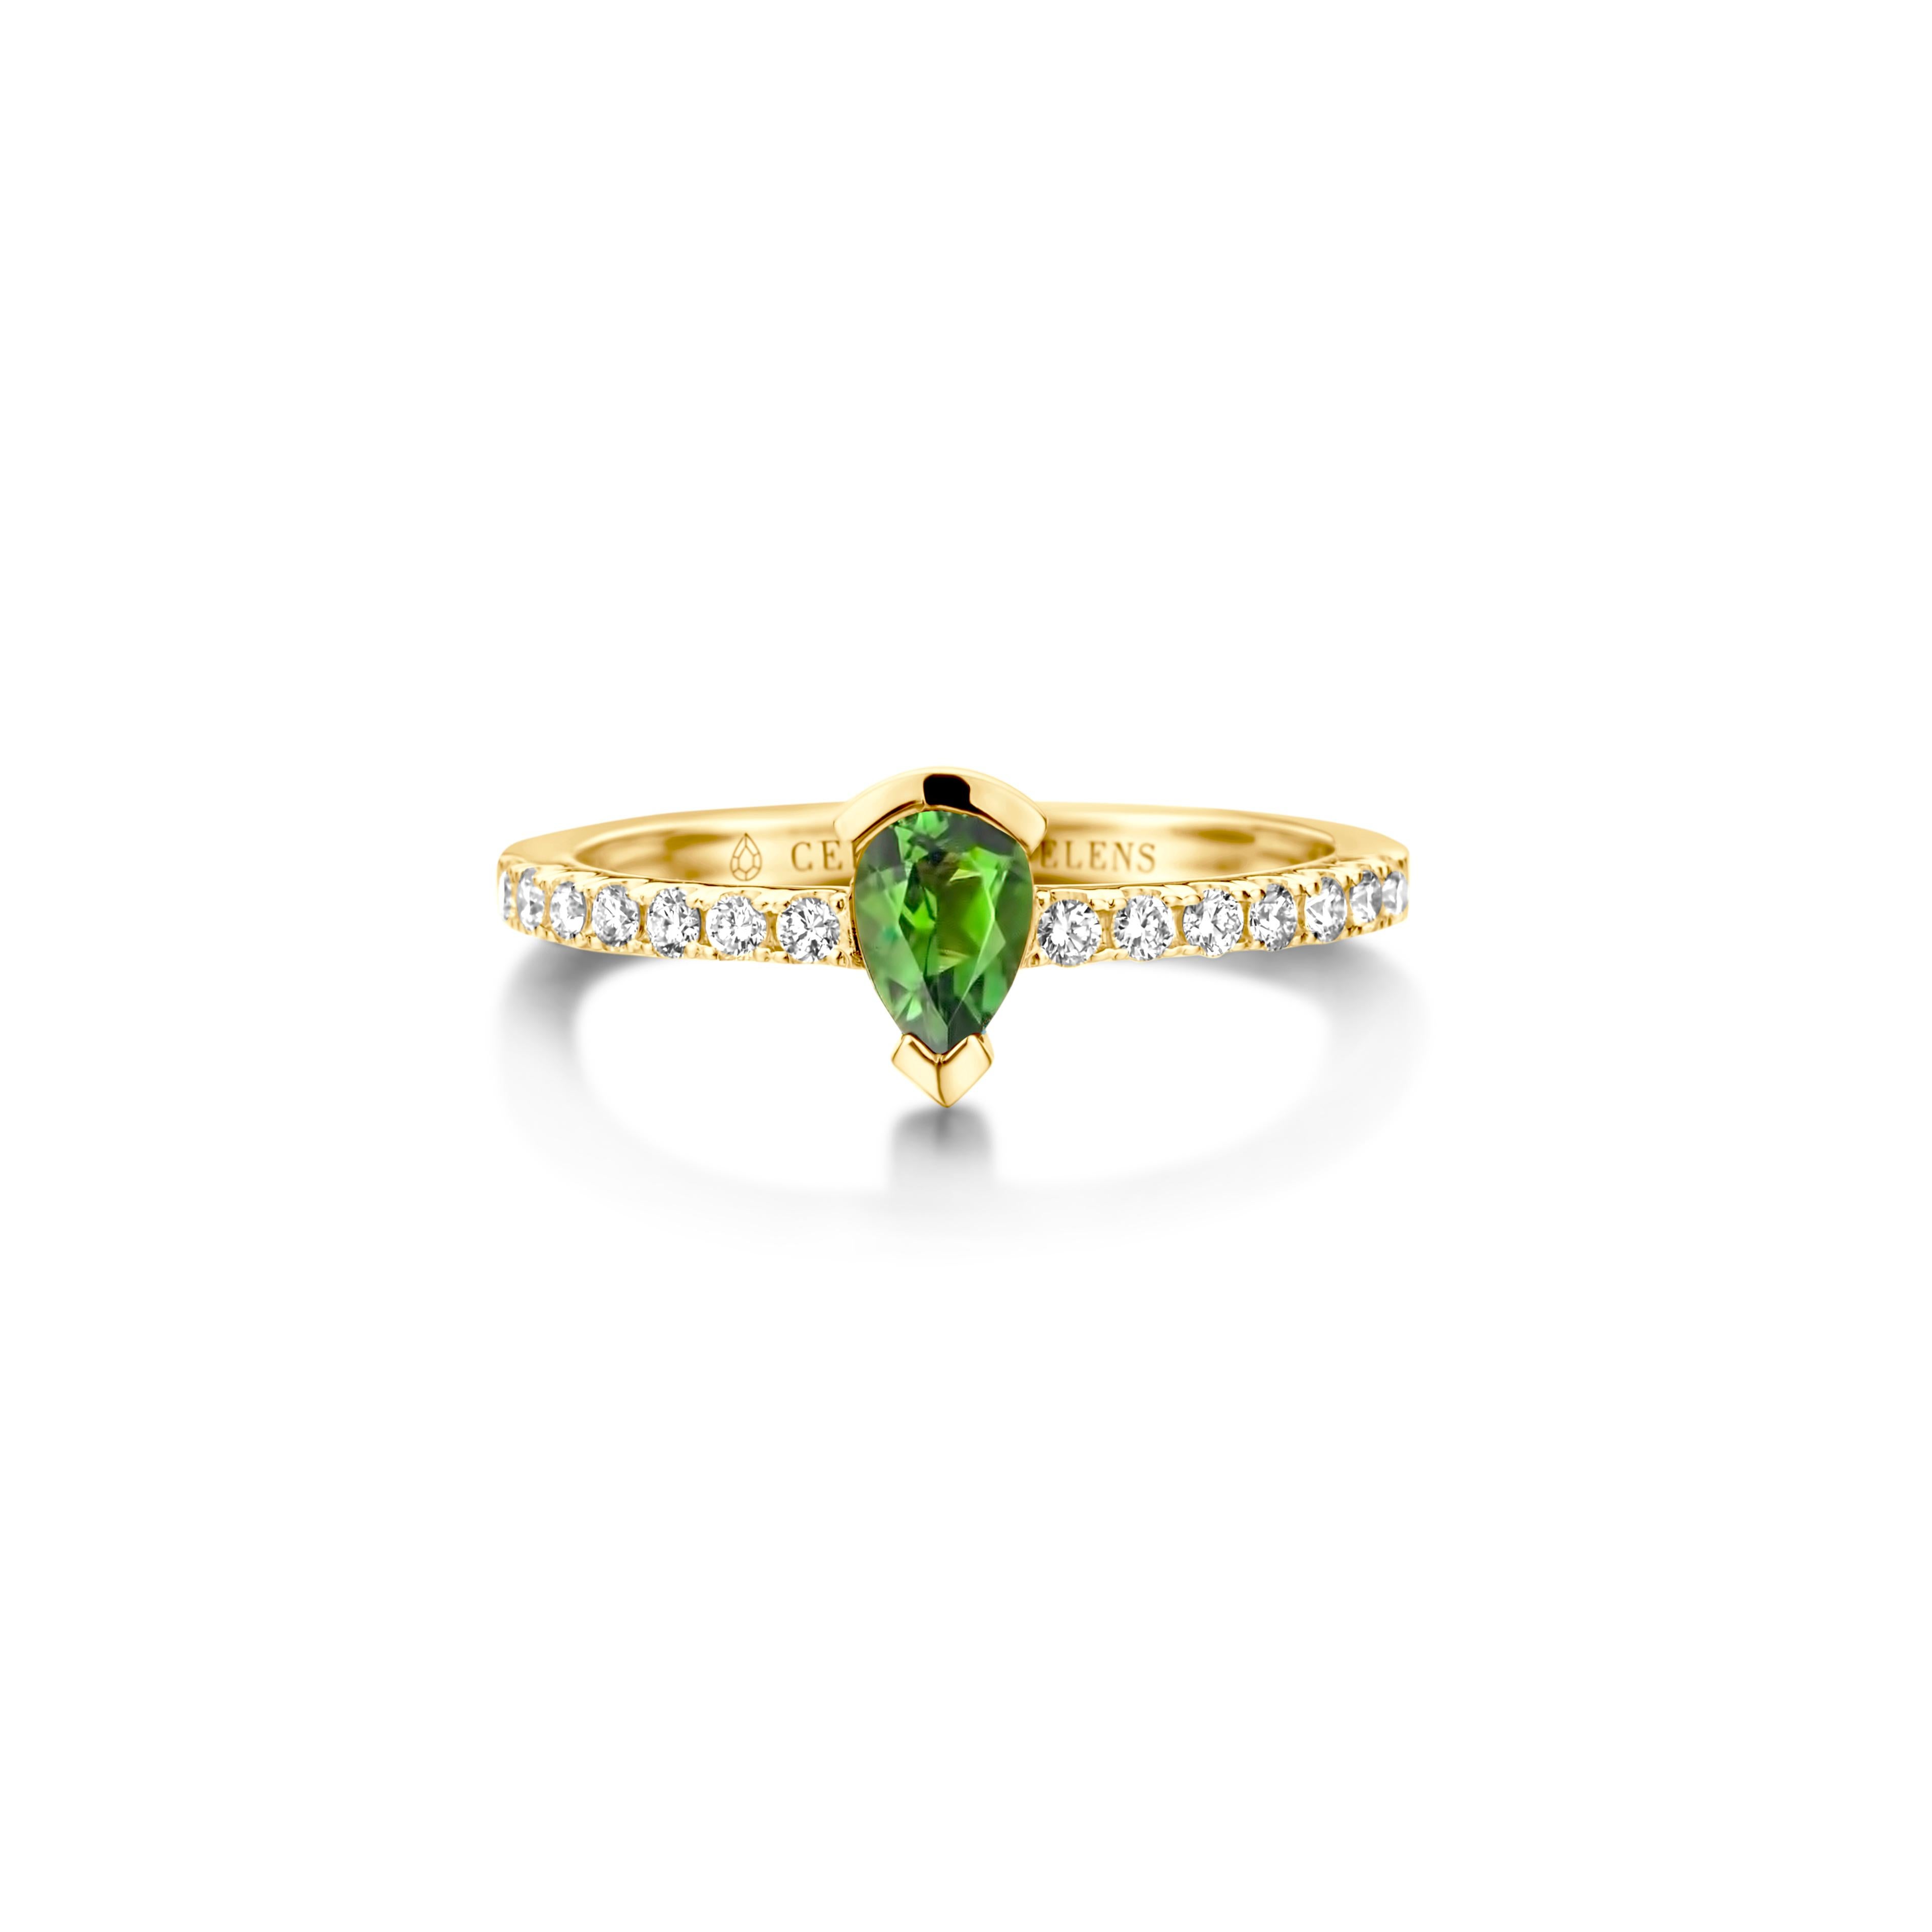 Adeline Straight ring in 18Kt white gold set with a pear-shaped green tourmaline and 0,24 Ct of white brilliant cut diamonds - VS F quality. Also, available in yellow gold and white gold. Celine Roelens, a goldsmith and gemologist, is specialized in